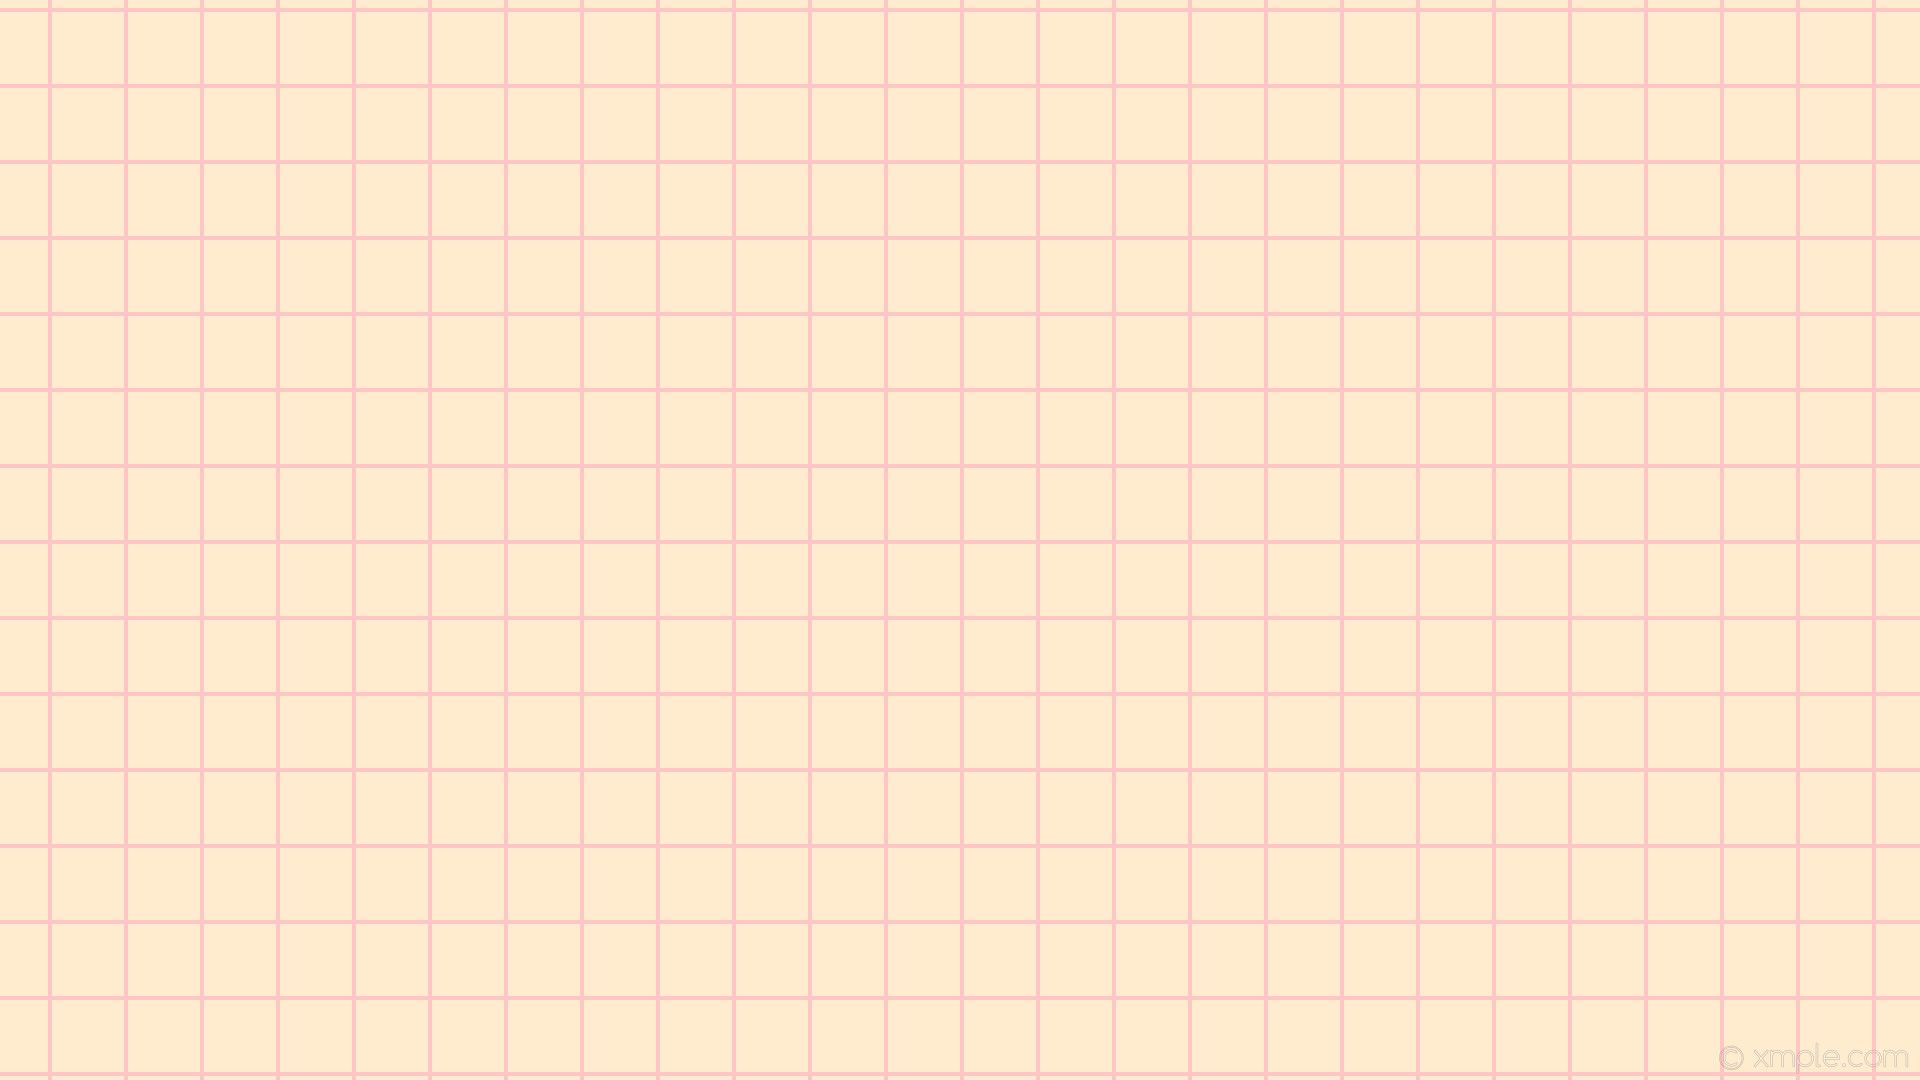 Pink grid lines on a yellow background - Grid